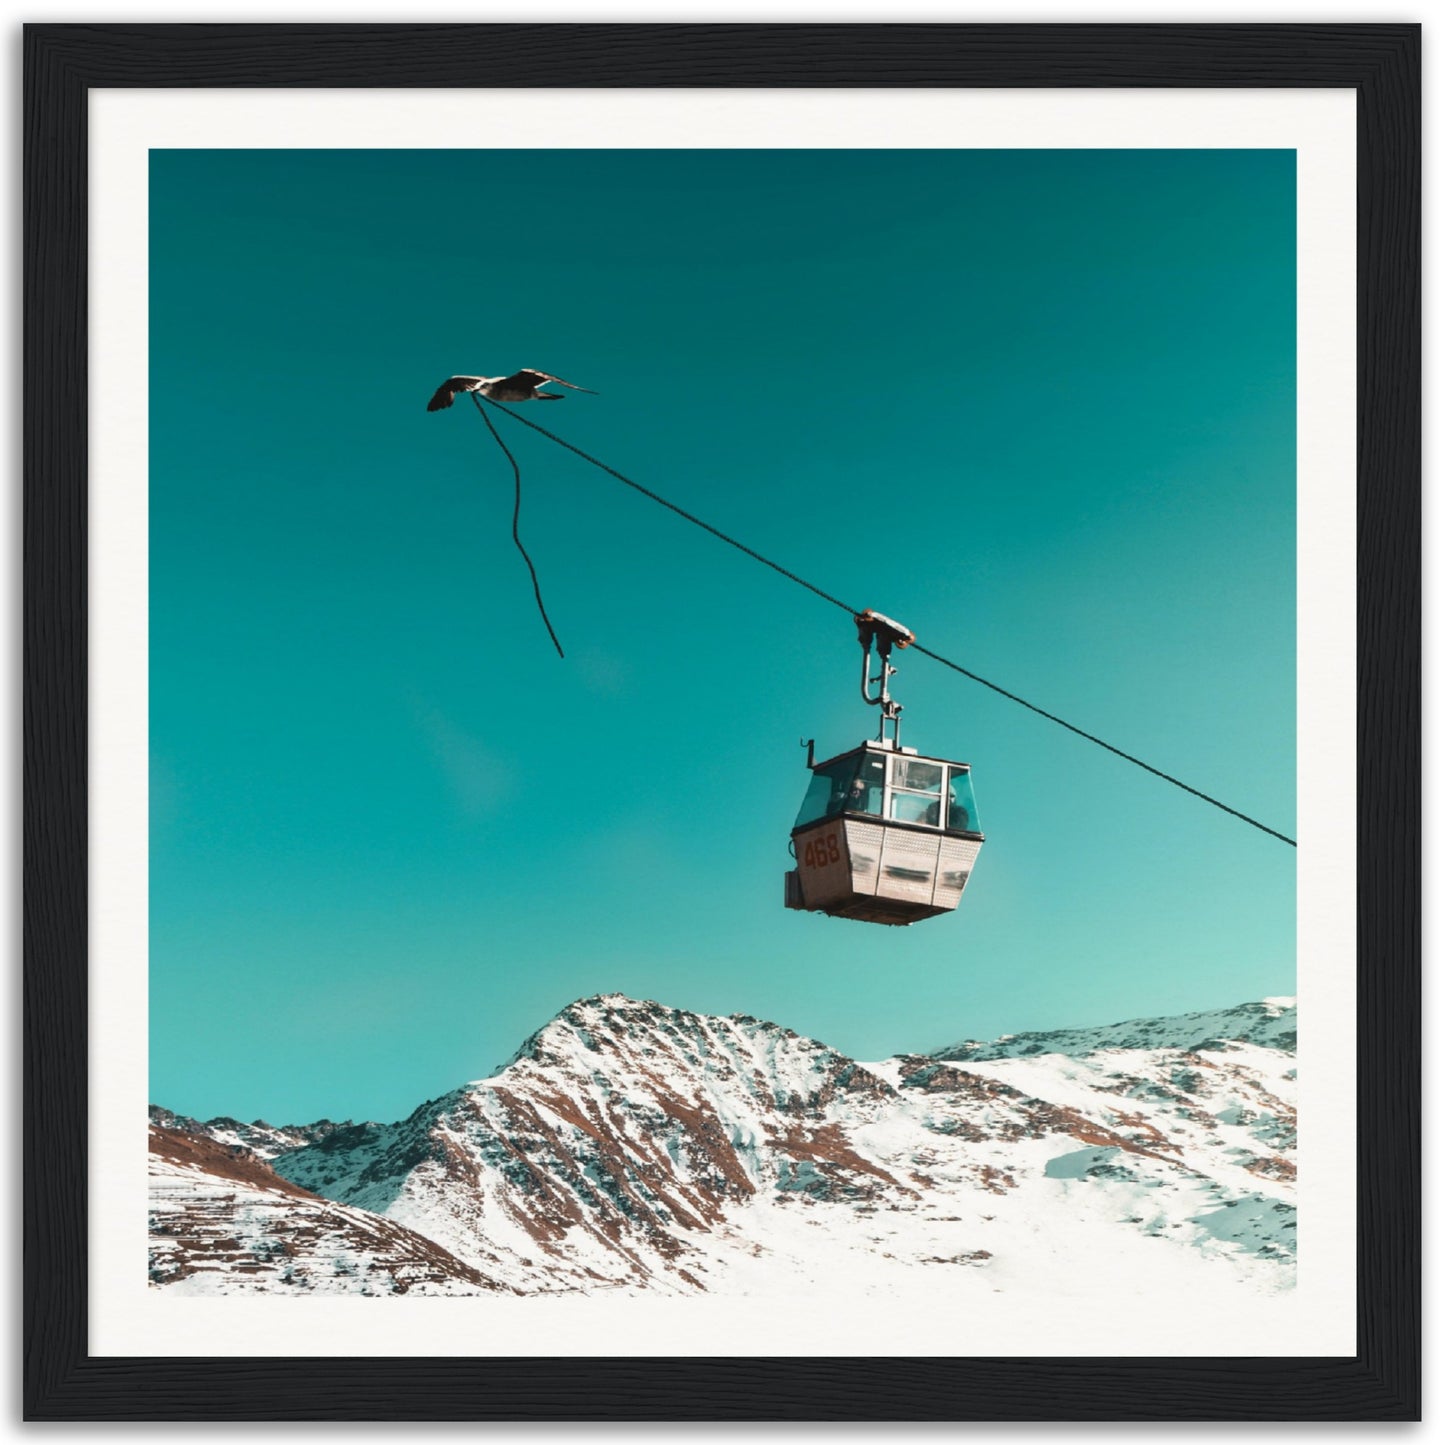 Free Your Imagination - Museum-Quality Framed Art Print